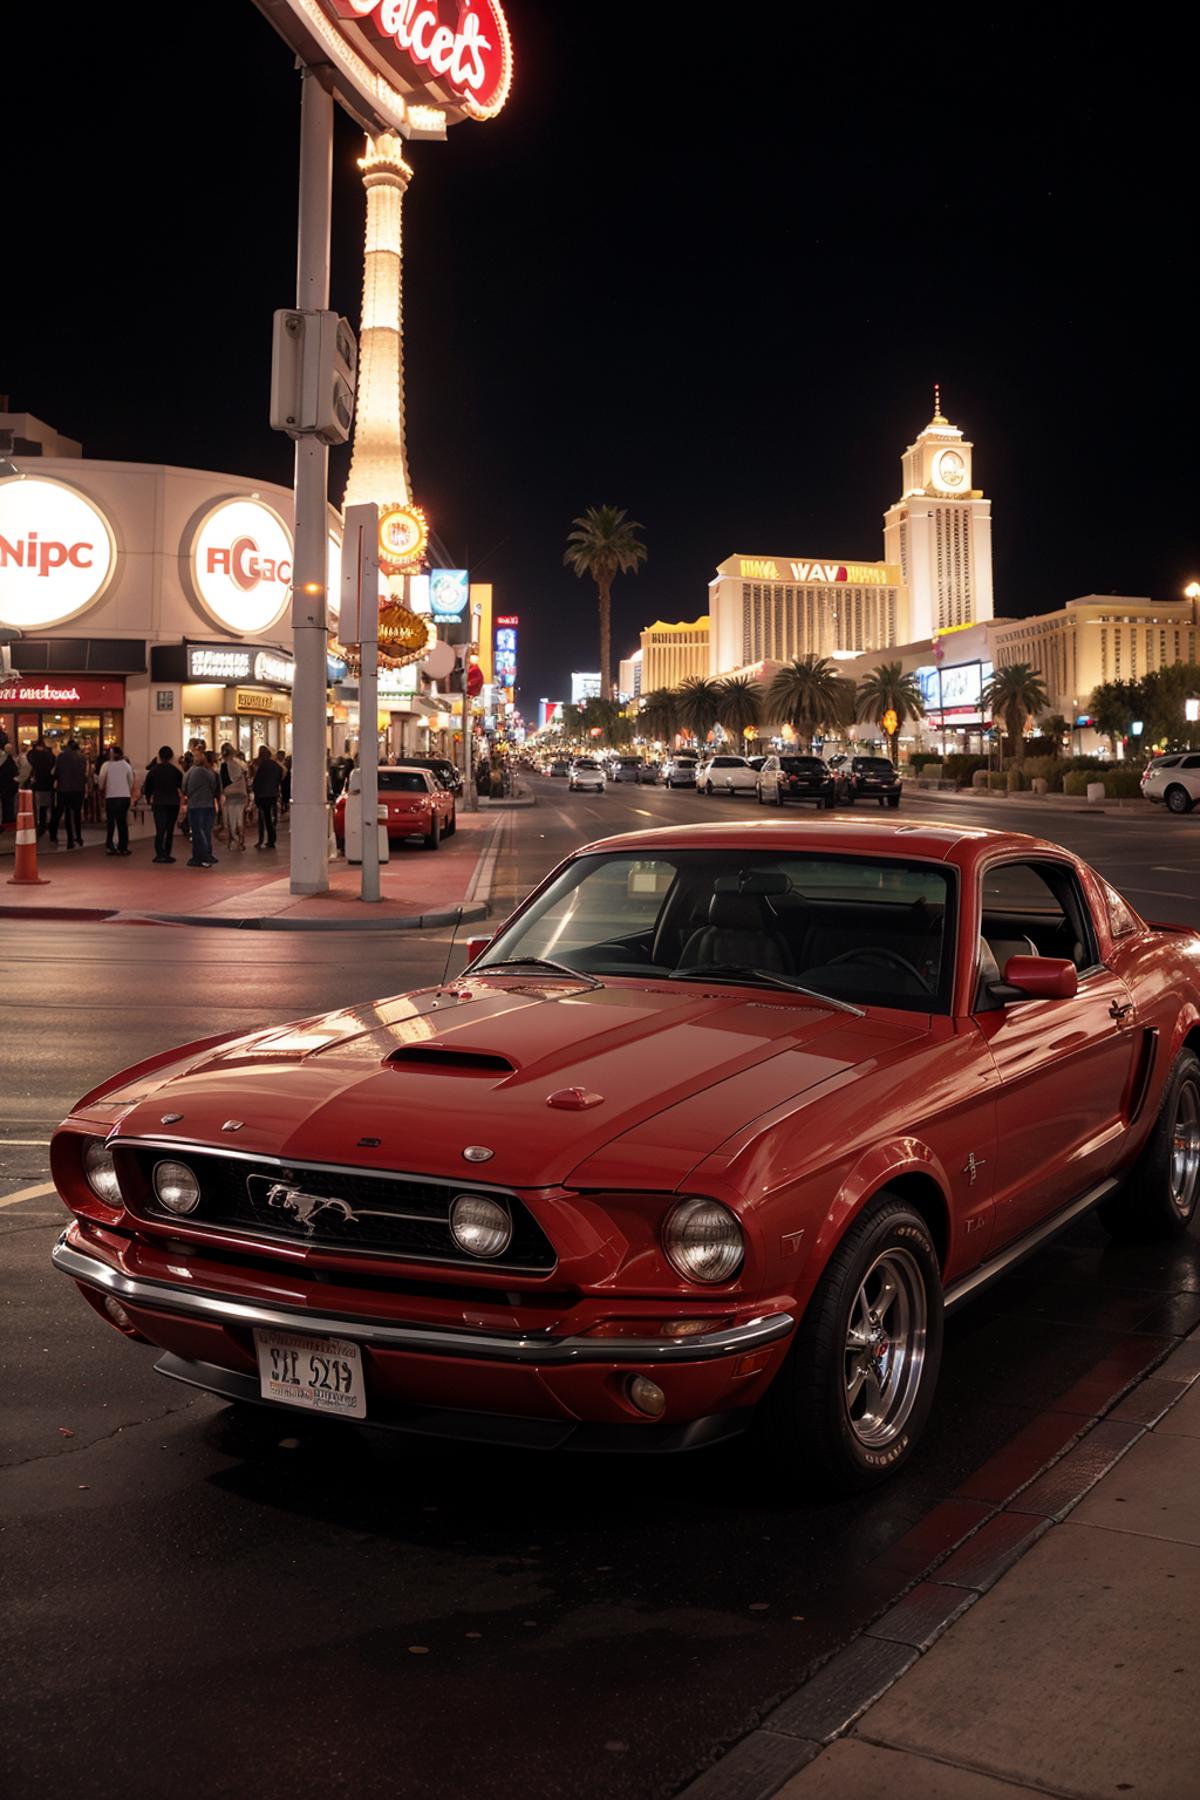 A red Mustang muscle car parked on a busy street in Las Vegas.